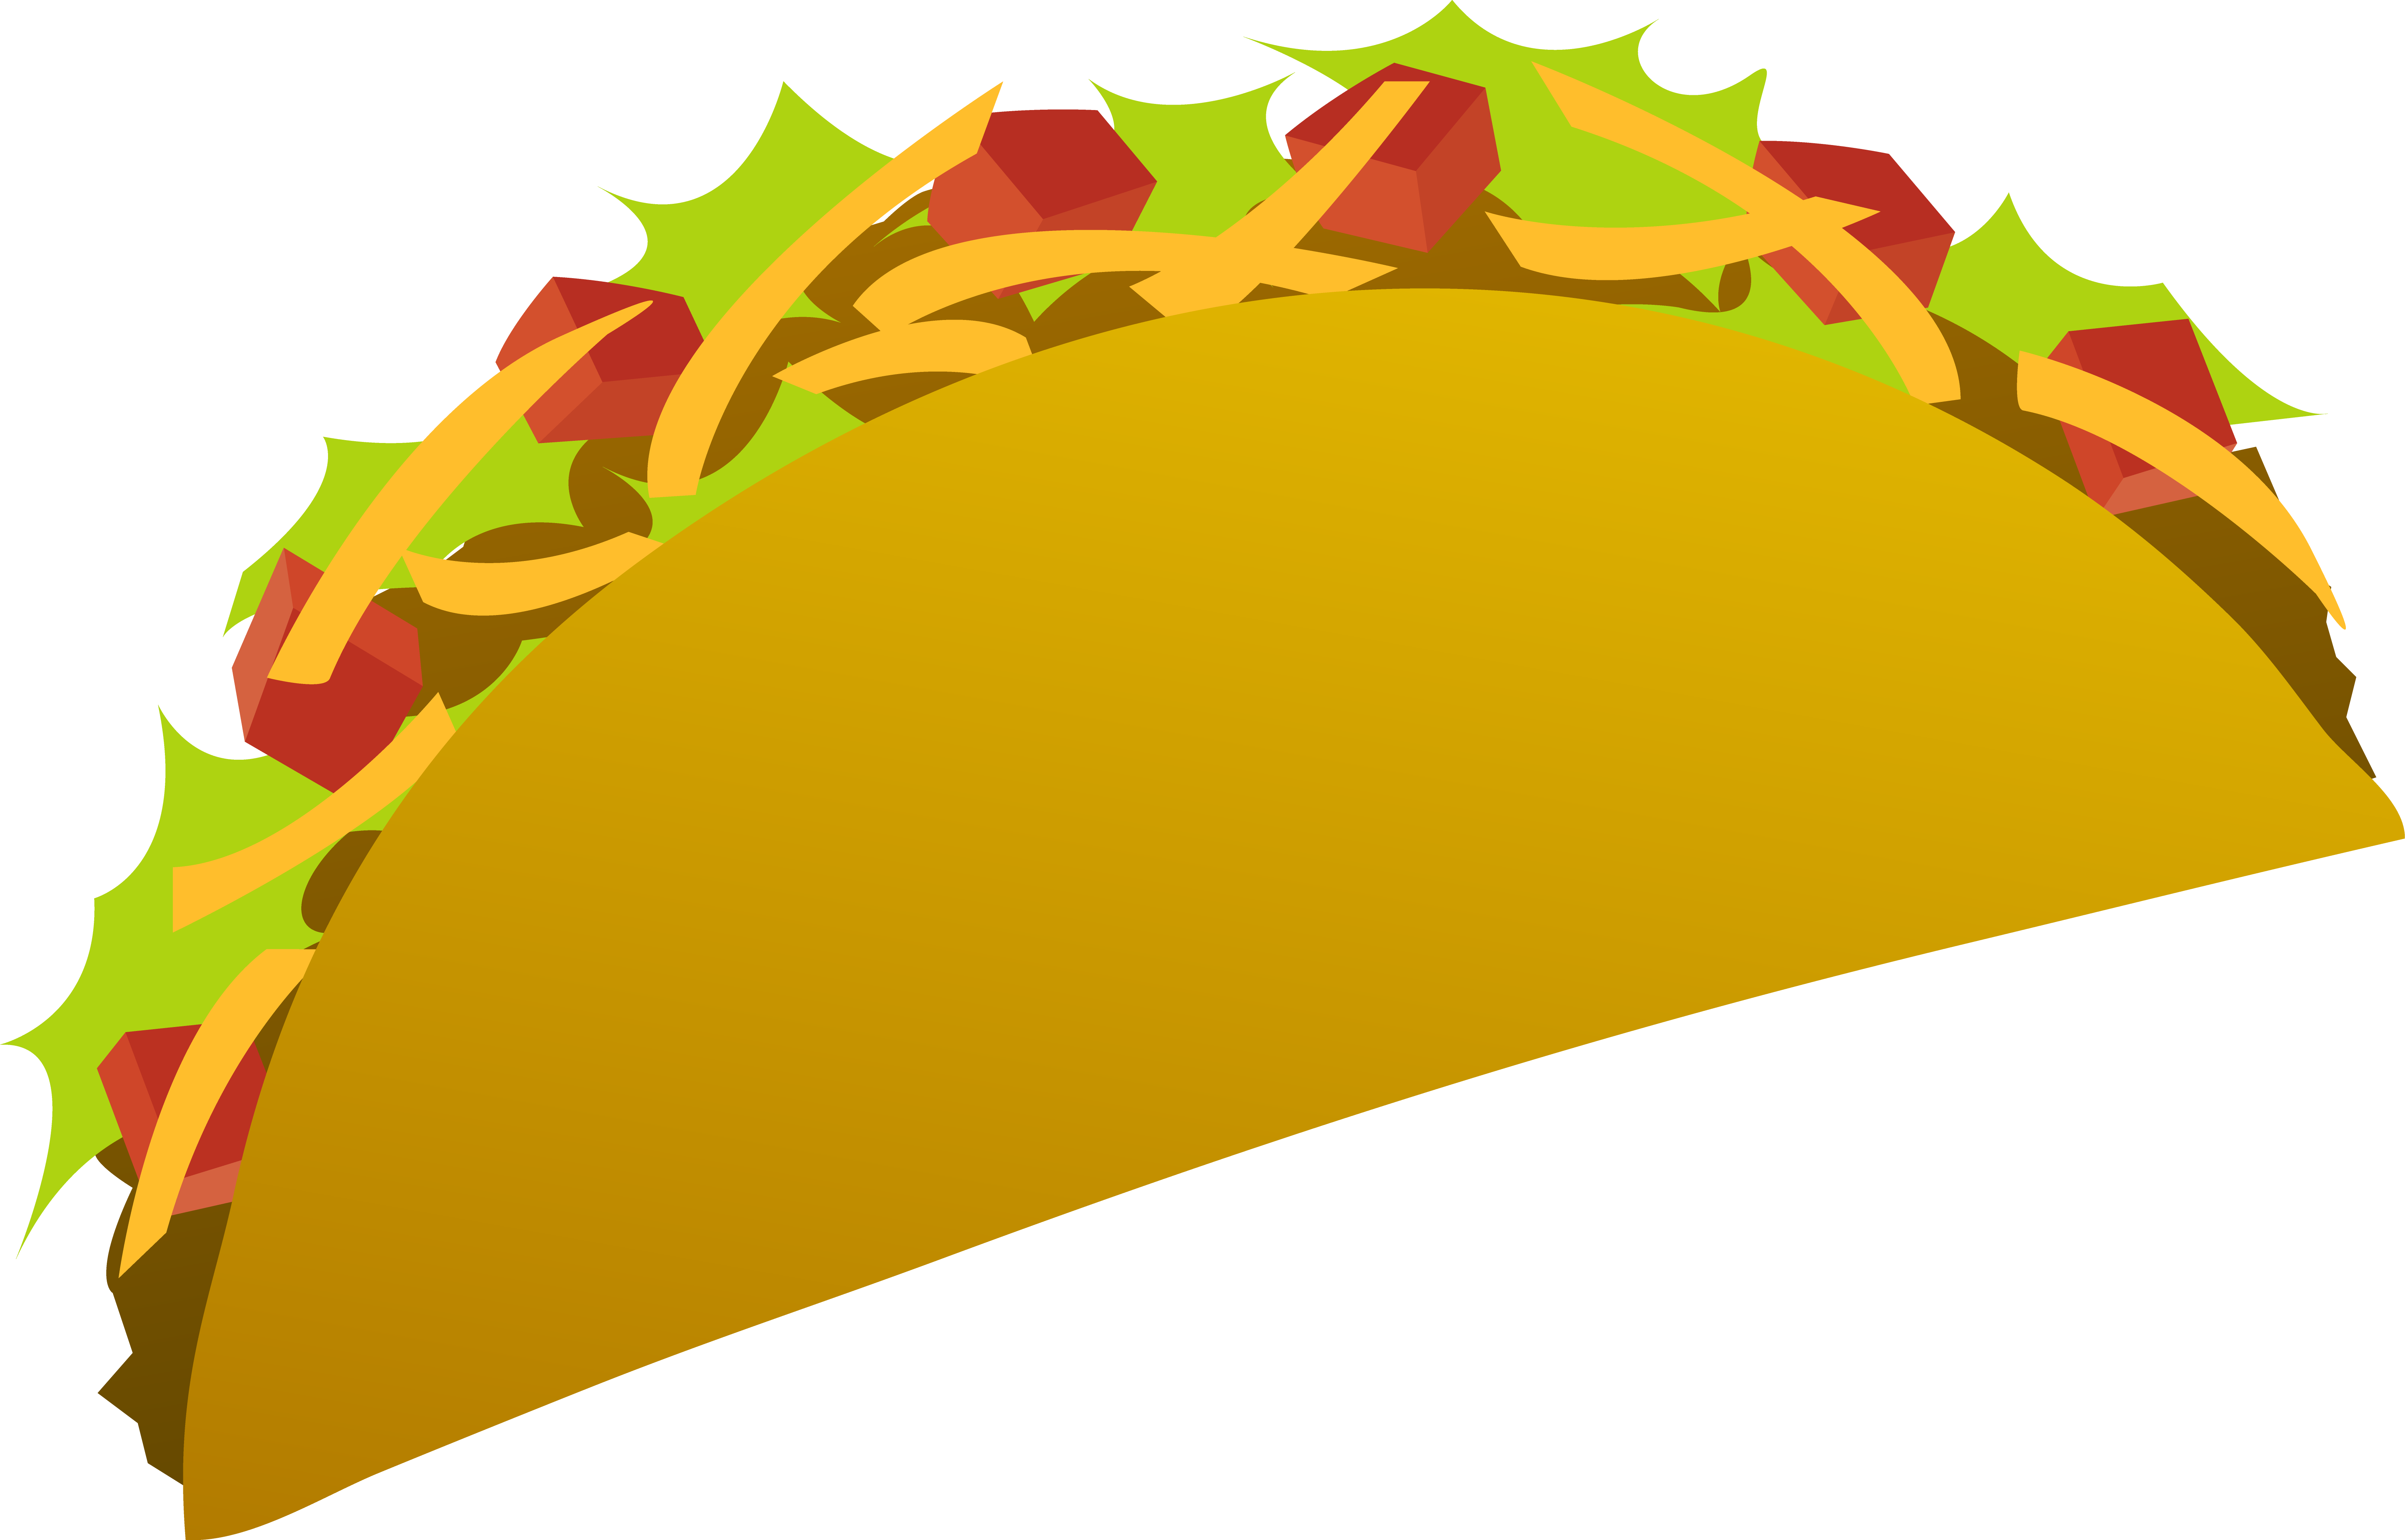 Tacos Clipart Food Spain Picture 3186854 Tacos Clipart Food Spain